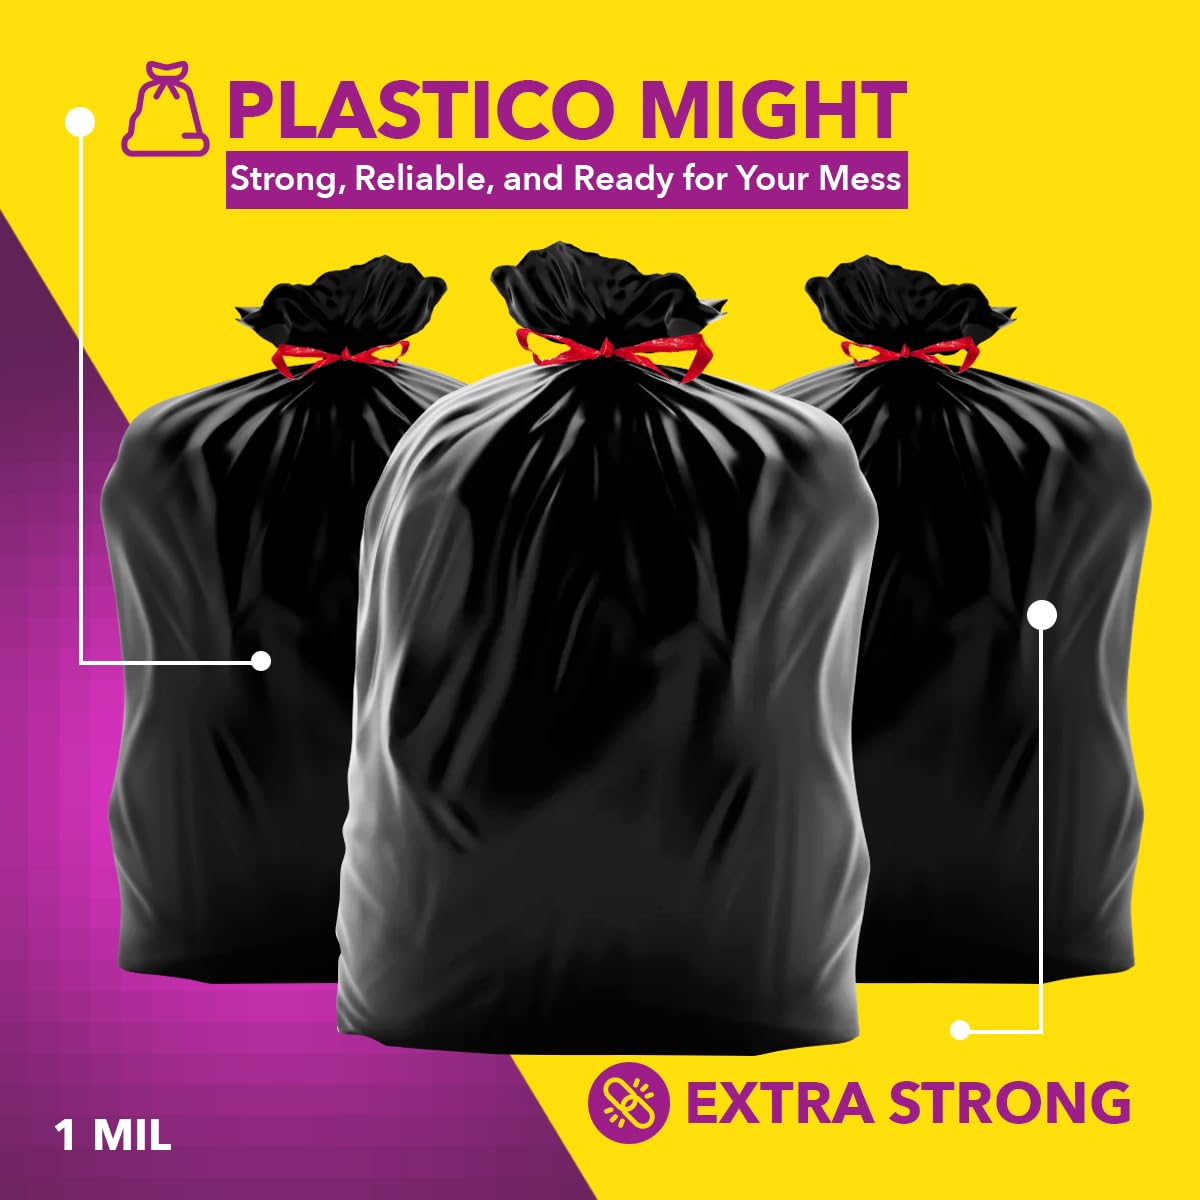 Plastico Tall Kitchen Trash Bags - 13 Gallon, Black, Extra Strong Garbage Bags, Easy Drawstrings - 45 Count, Odor Guard Control, 1 Mil Thick Plastic